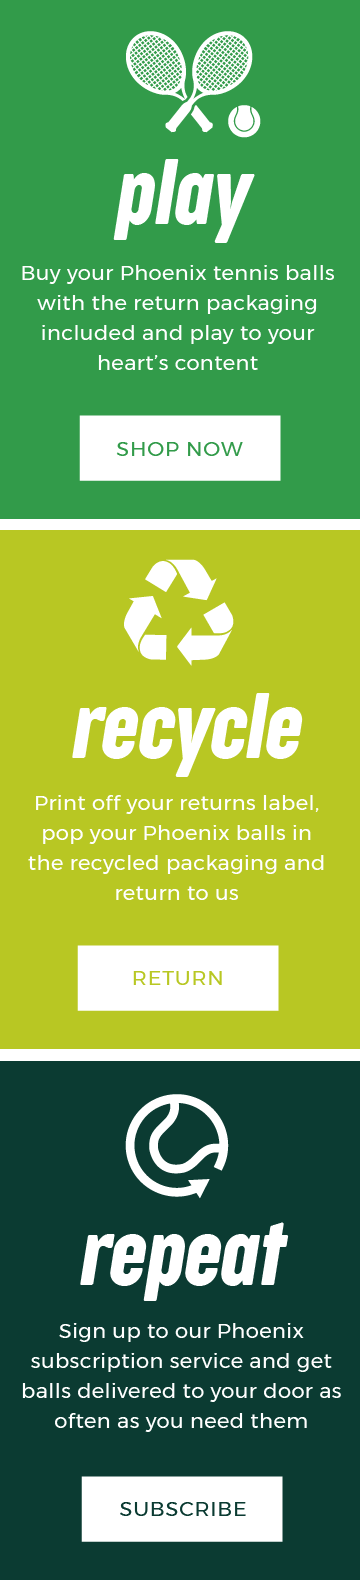 Phoenix Recycled Tennis Ball, Play Recycle Repeat, Price of Bath.